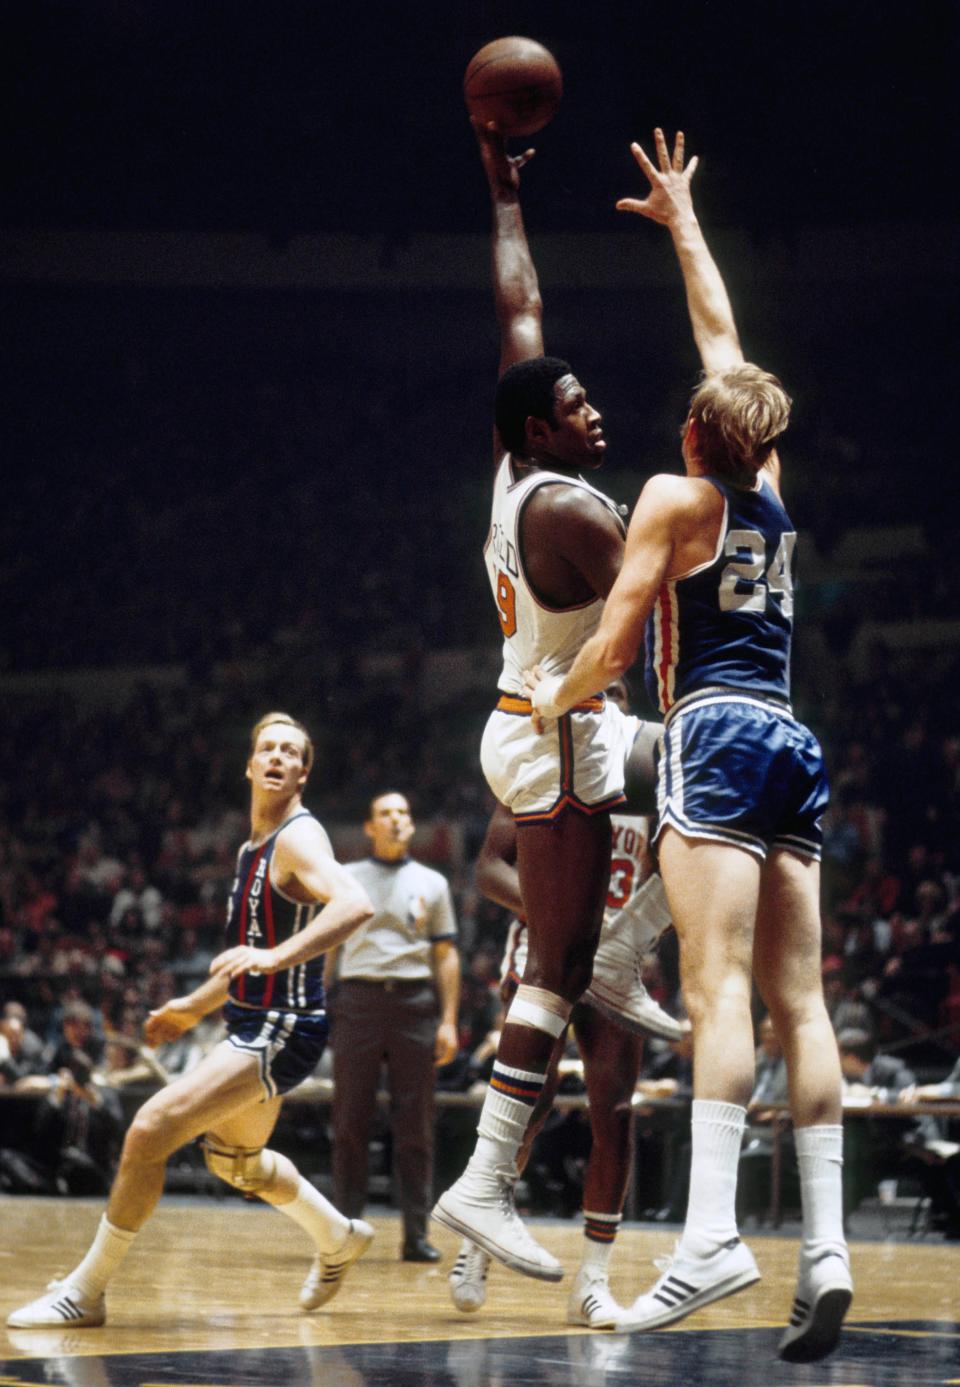 Feb. 7, 1970; New York, NY, USA; FILE PHOTO; New York Knicks center Willis Reed (19) shoots over Cincinnati Royals center Connie Dierking (24) at Madison Square Garden.